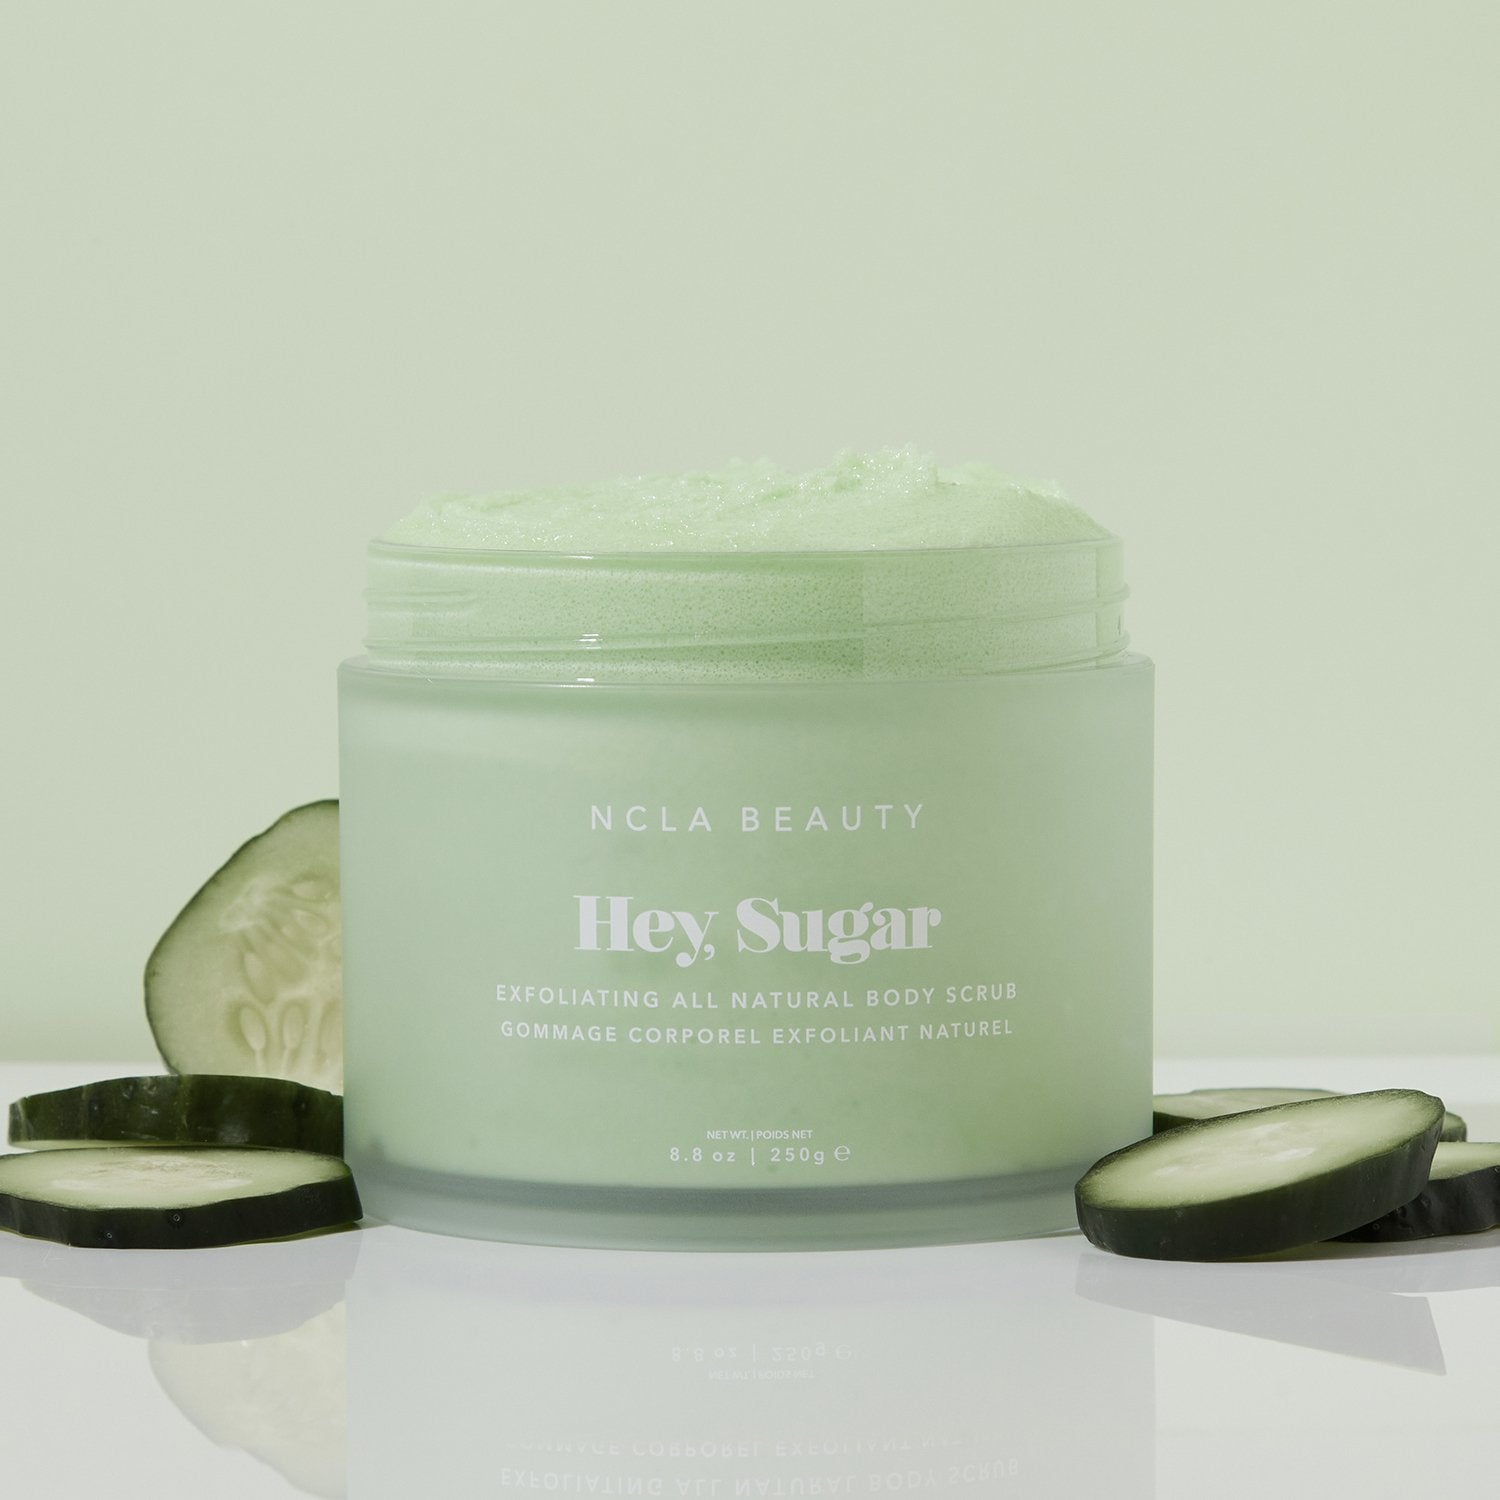 Cucumber sugar scrub in clear packaging, surrounded by cucumber slices.